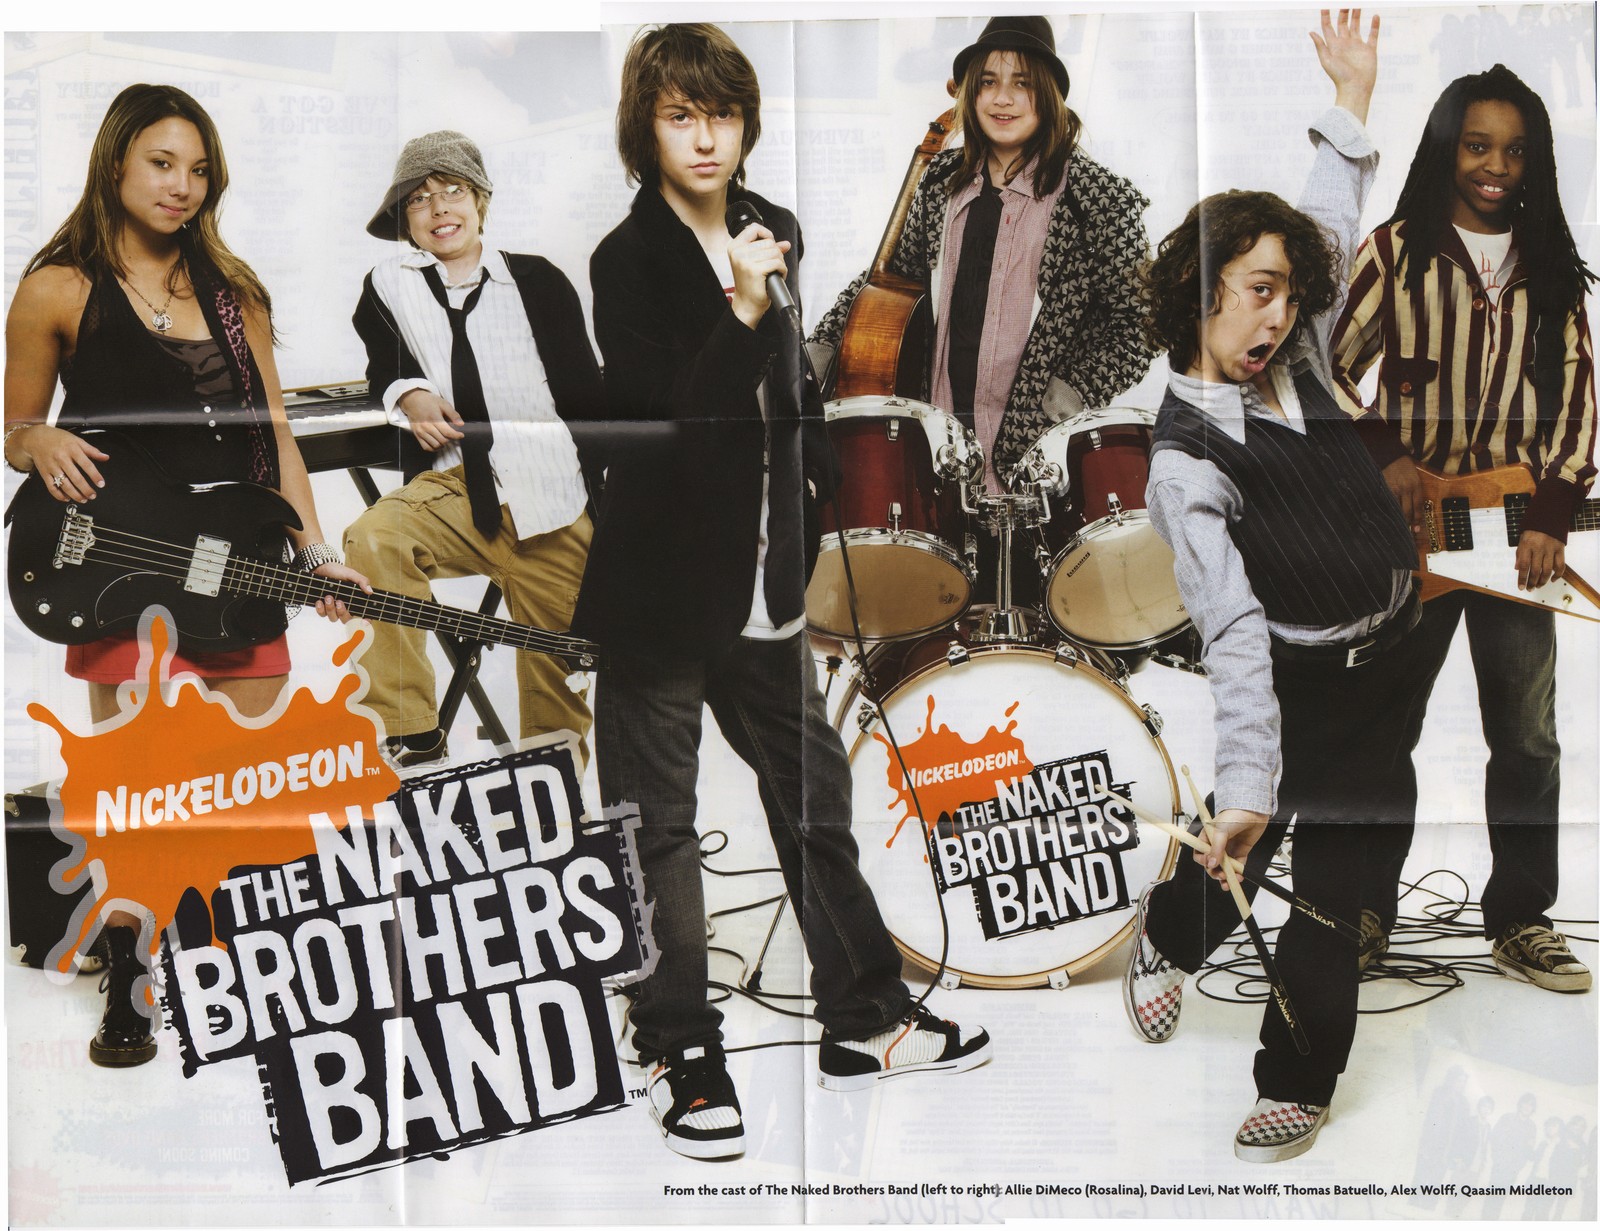 Atomic reccomend Rosalina by the naked brothers band